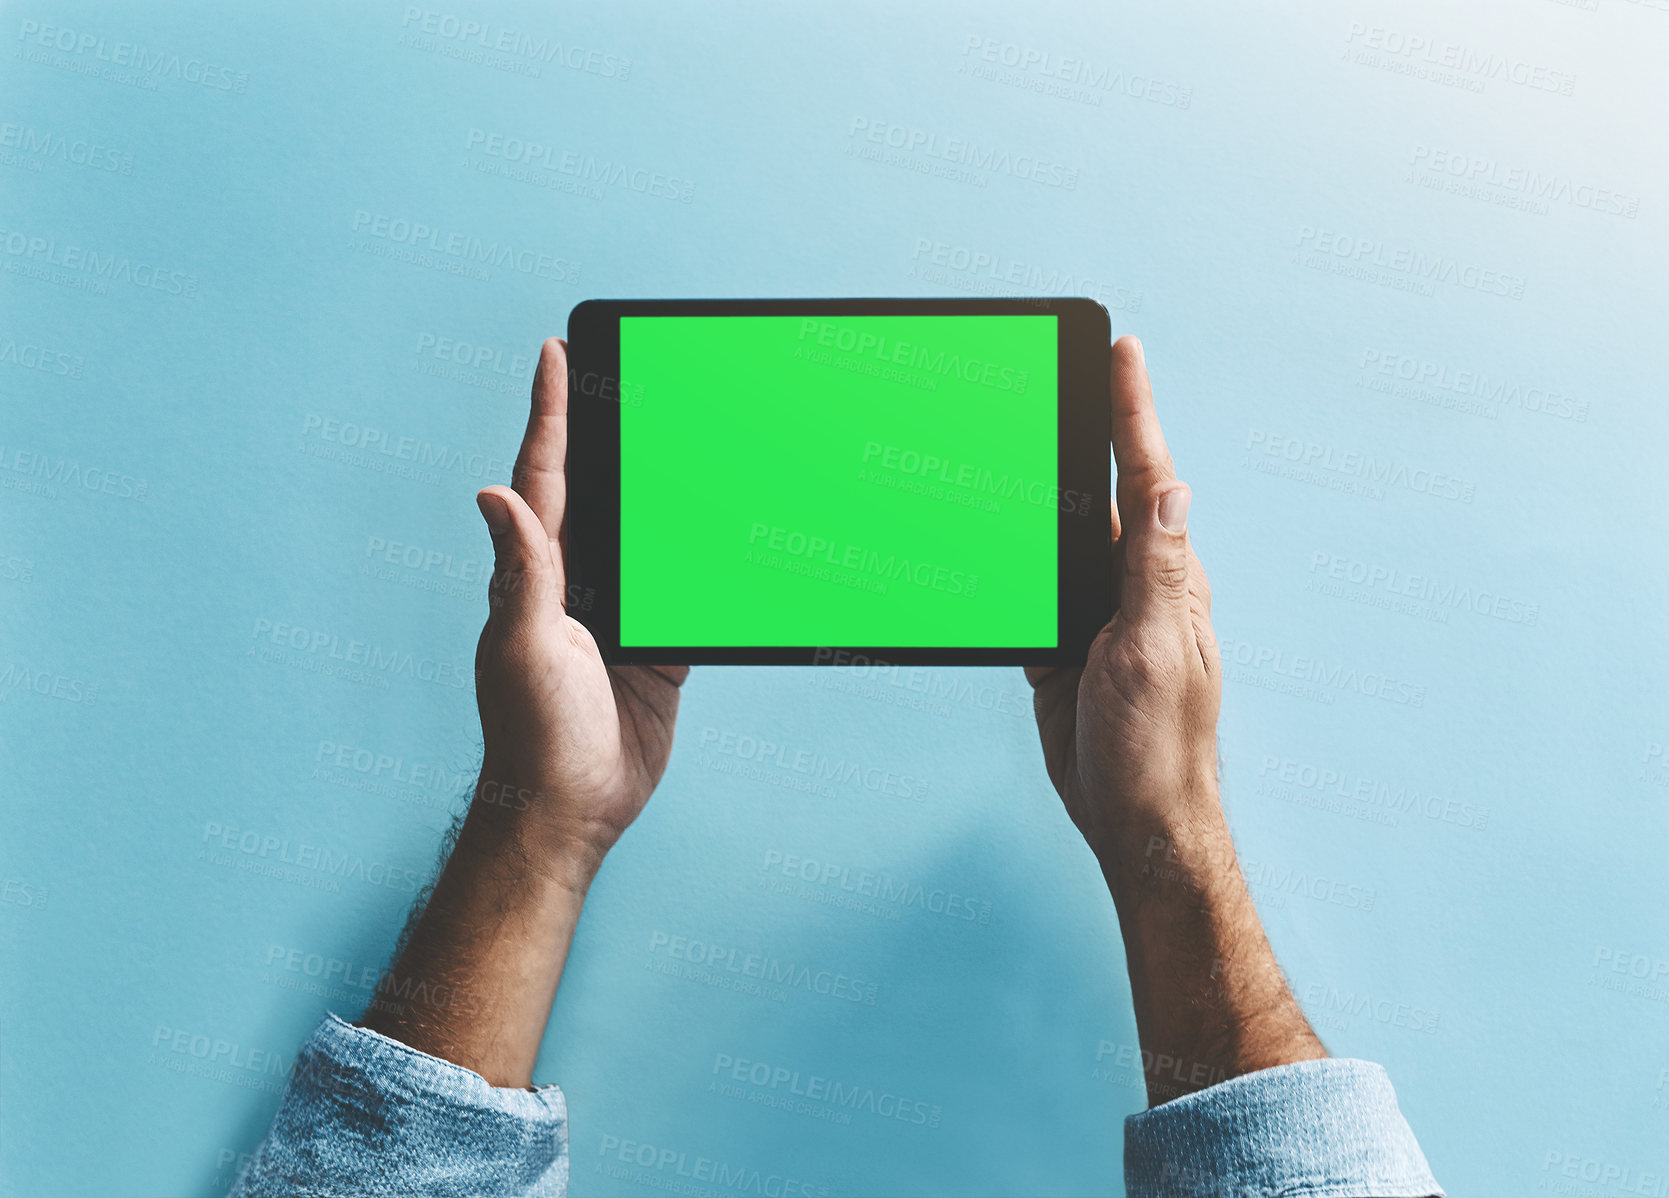 Buy stock photo Studio shot of a man holding a digital tablet with a green screen against a blue background